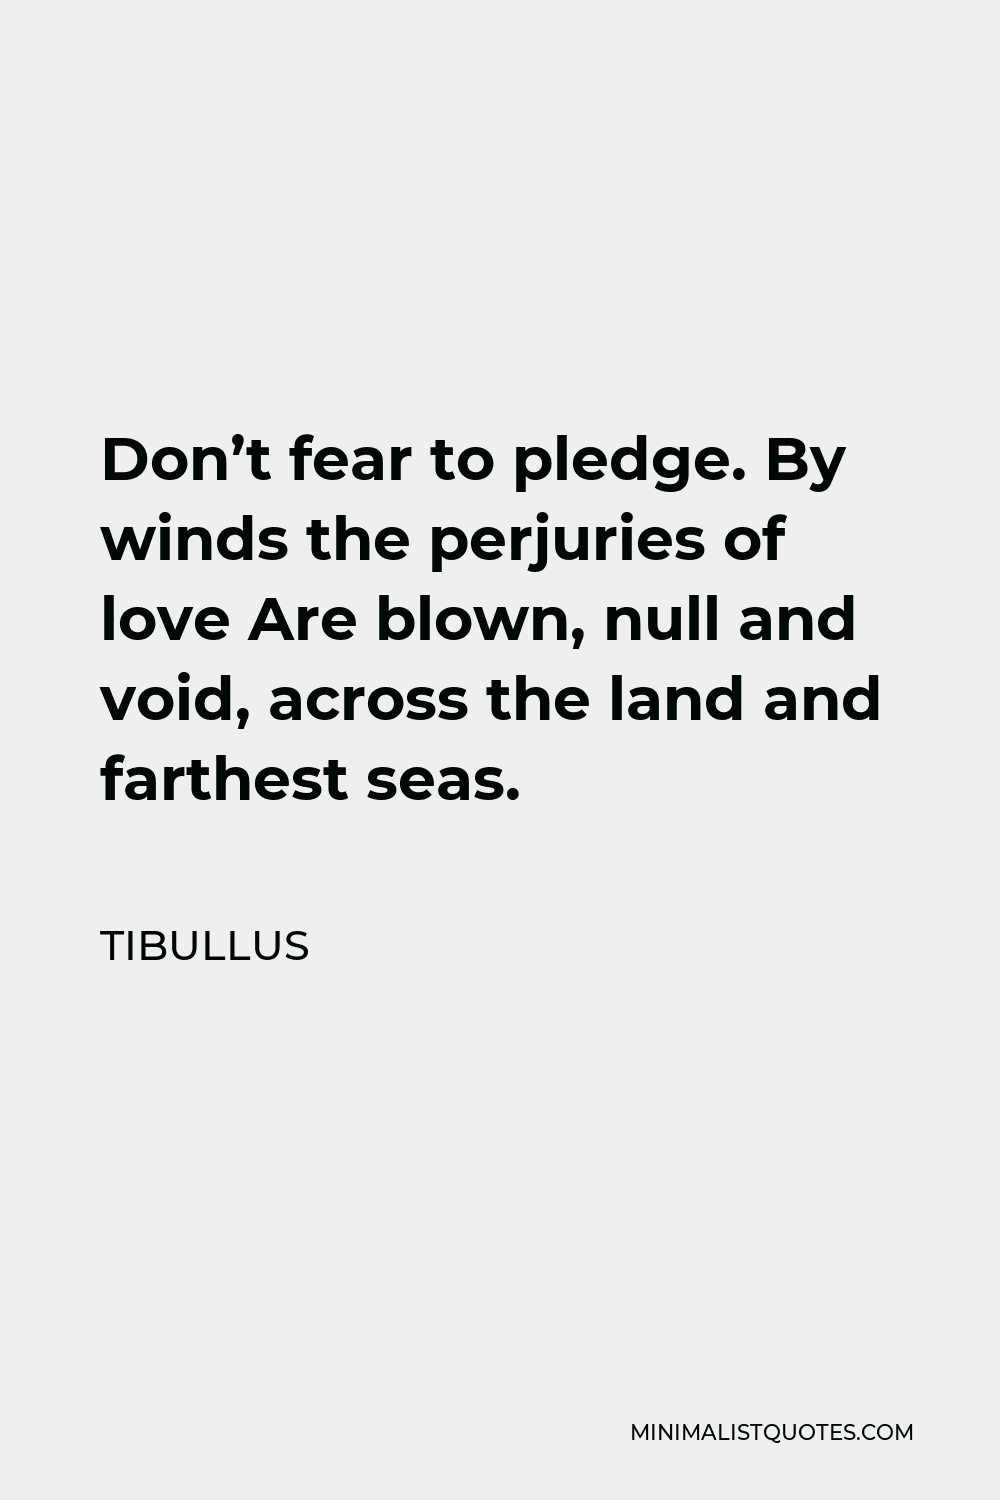 Tibullus Quote - Don’t fear to pledge. By winds the perjuries of love Are blown, null and void, across the land and farthest seas.